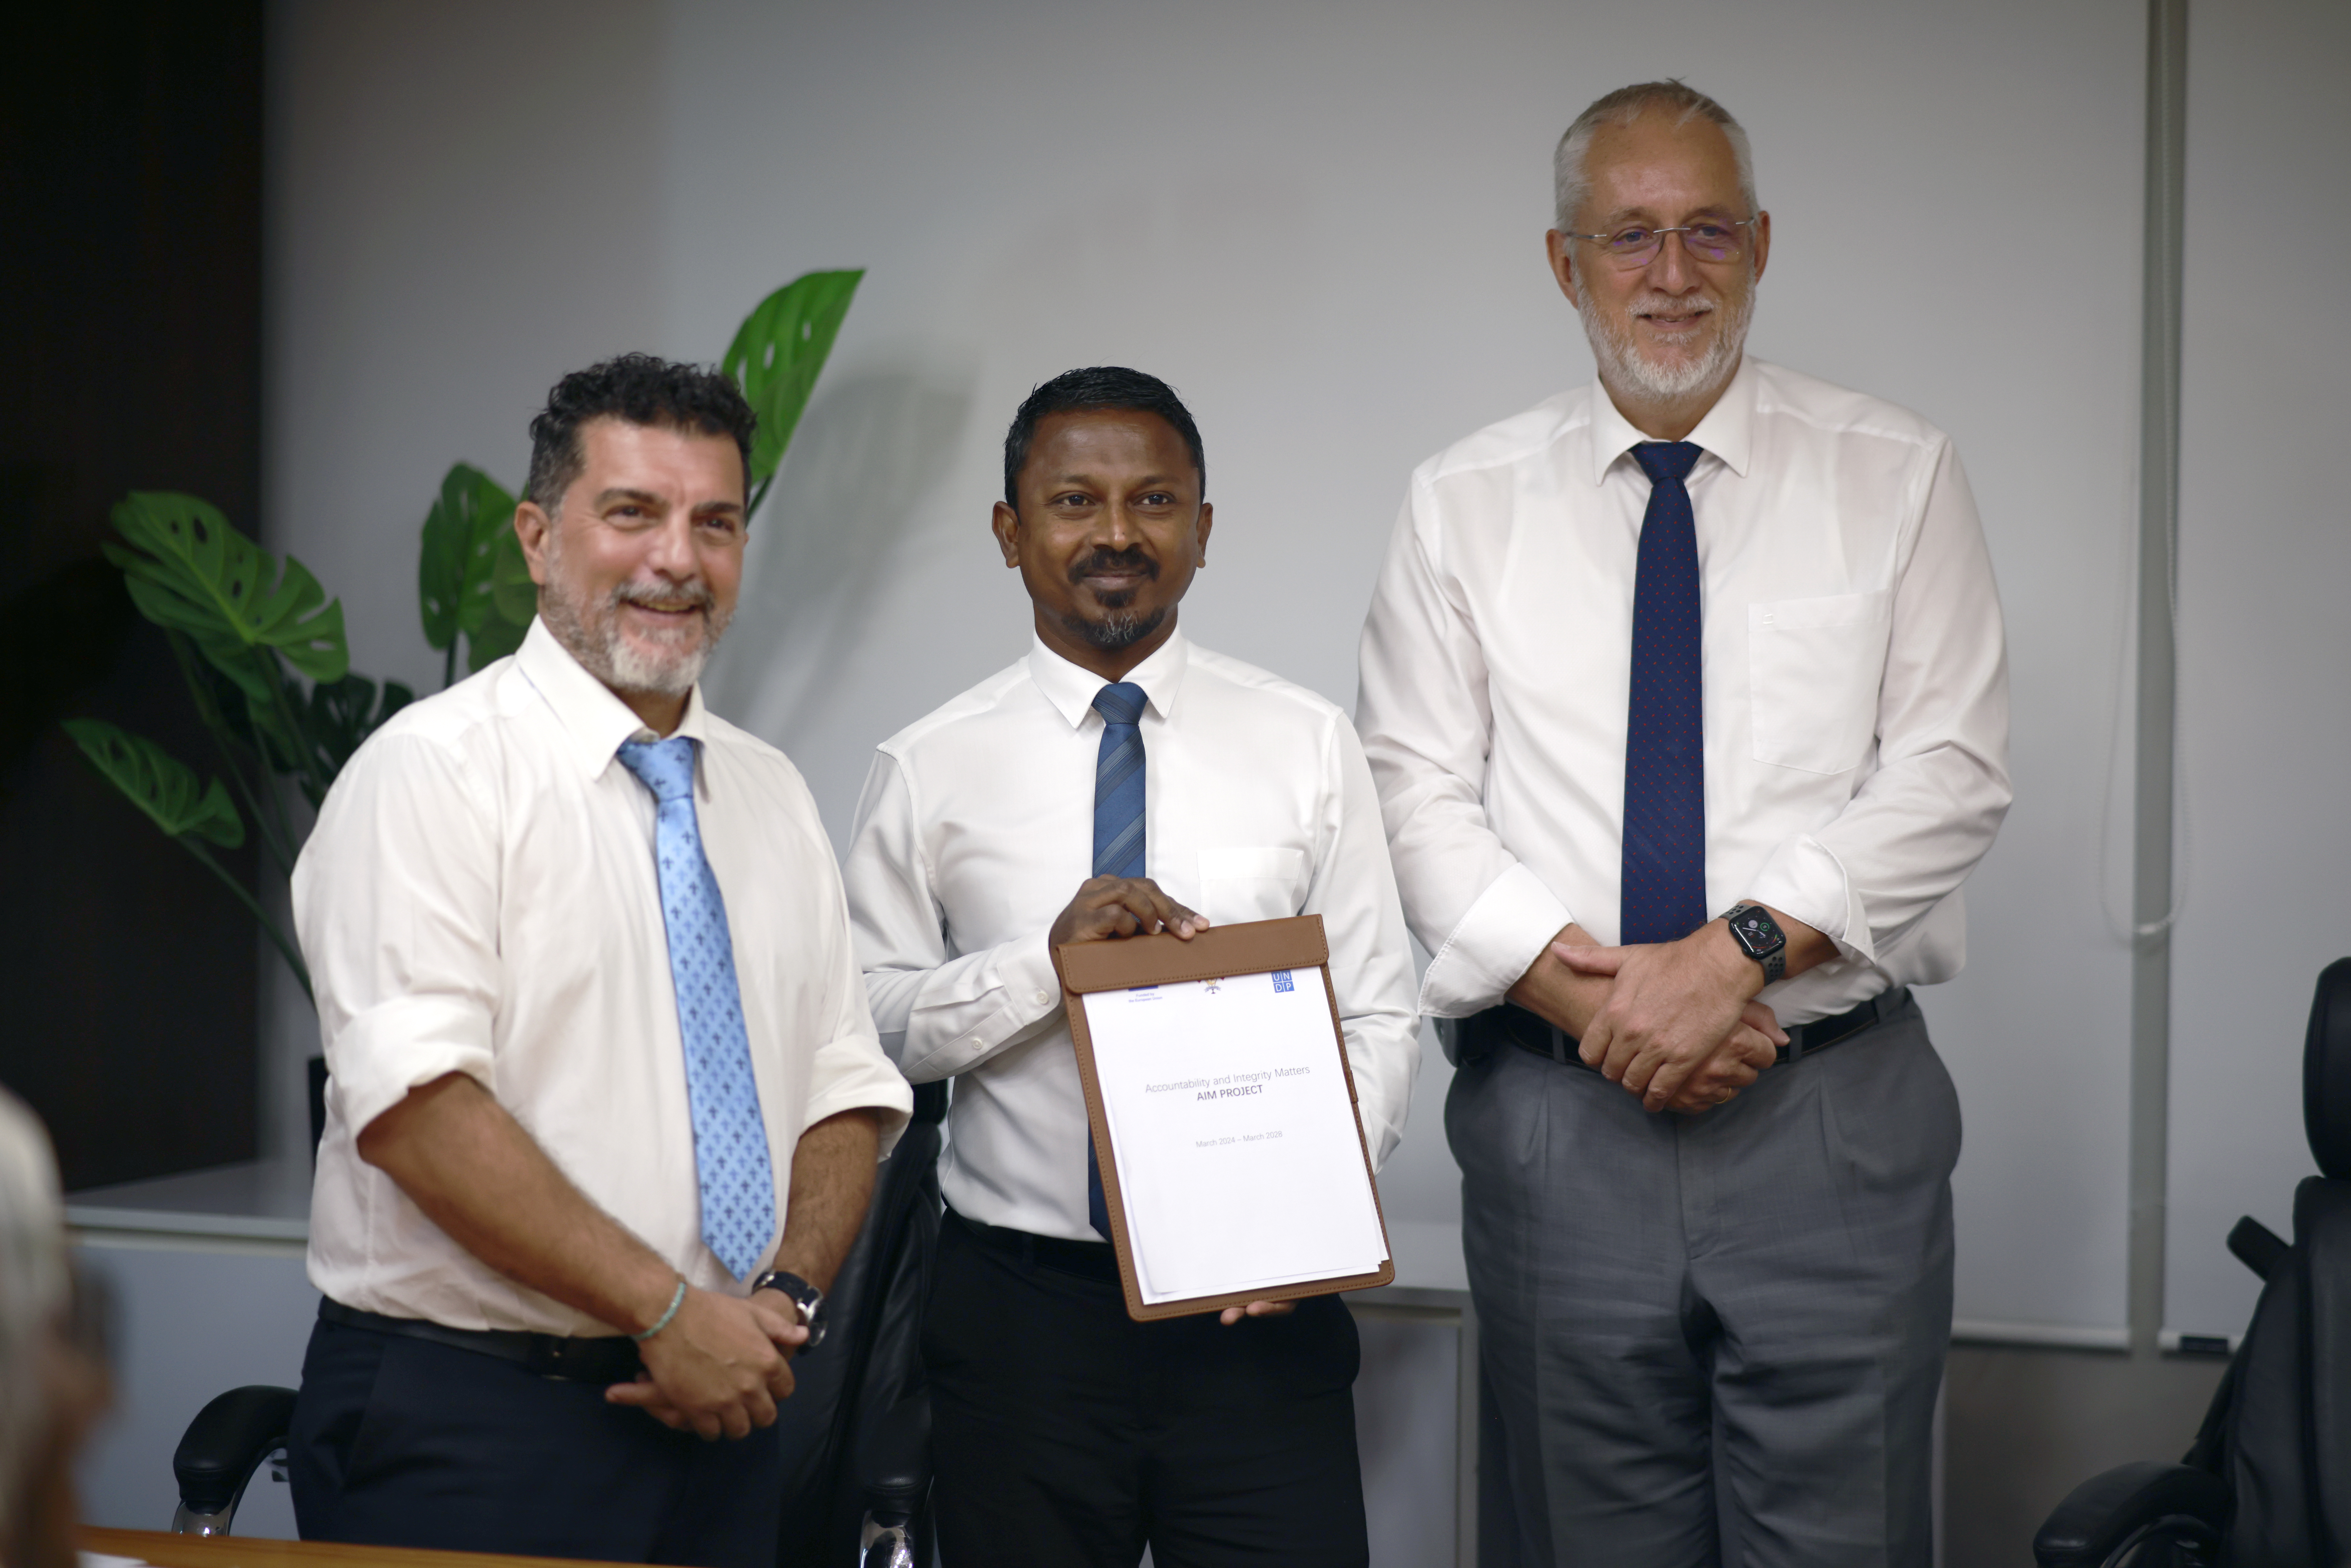 From left: UNDP Maldives RR, AG of Maldives and Head of EU Delegation to Sri Lanka and Maldives hold up the signed agreement. 